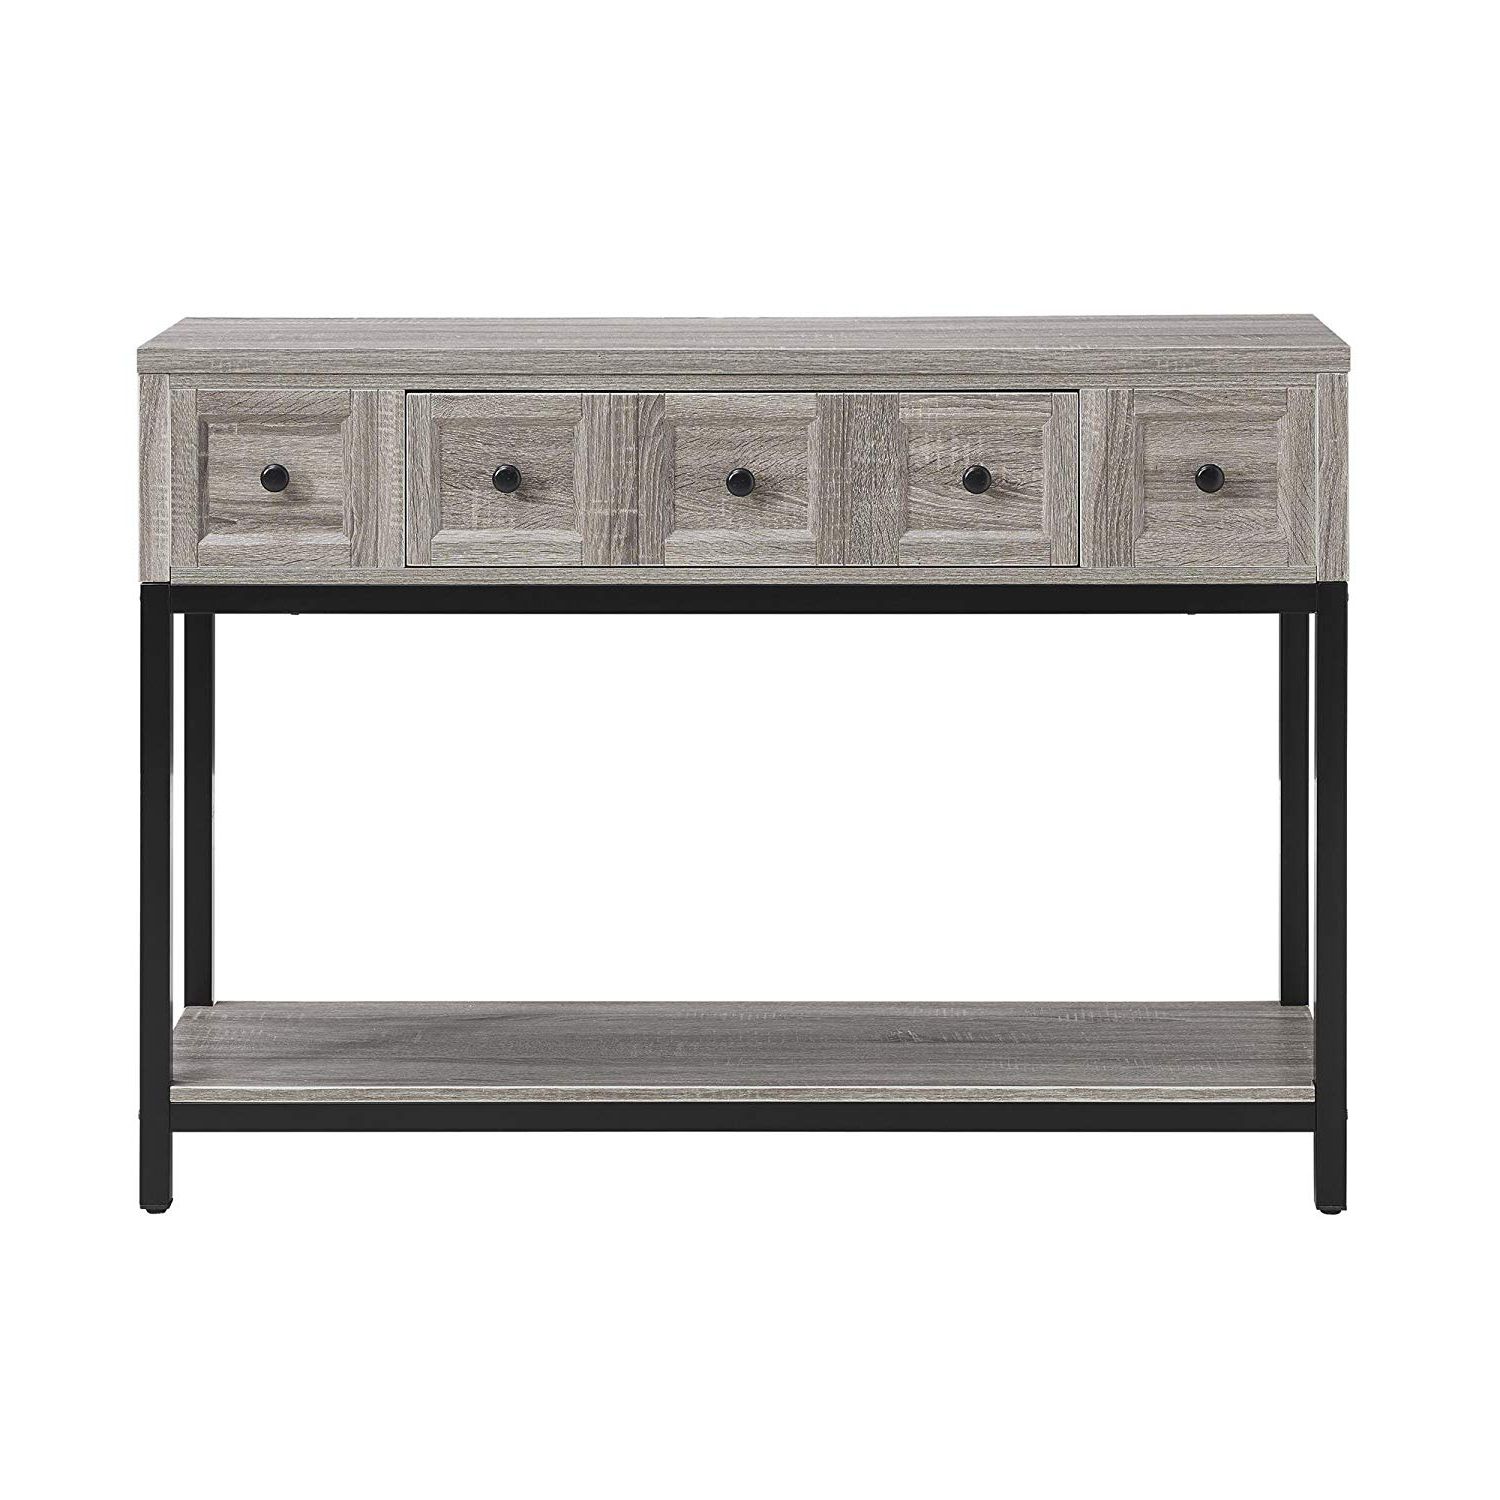 Latest Parsons White Marble Top & Dark Steel Base 48x16 Console Tables In Amazon: Altra Furniture Console Table In Sonoma Oak Finish (View 10 of 20)